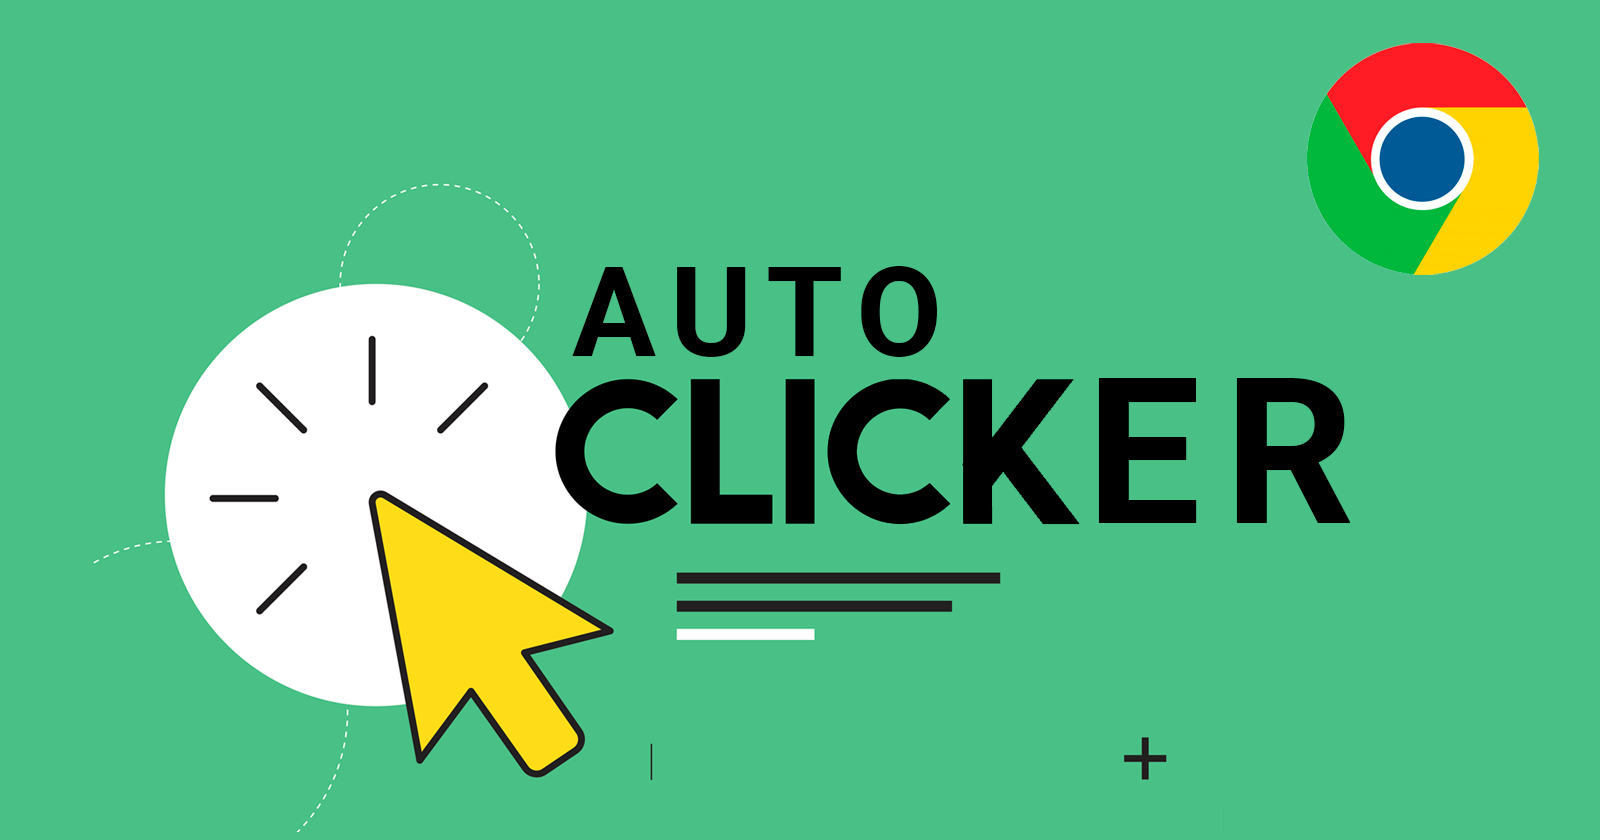 6 Best Auto Clicker for Roblox (Ranked)